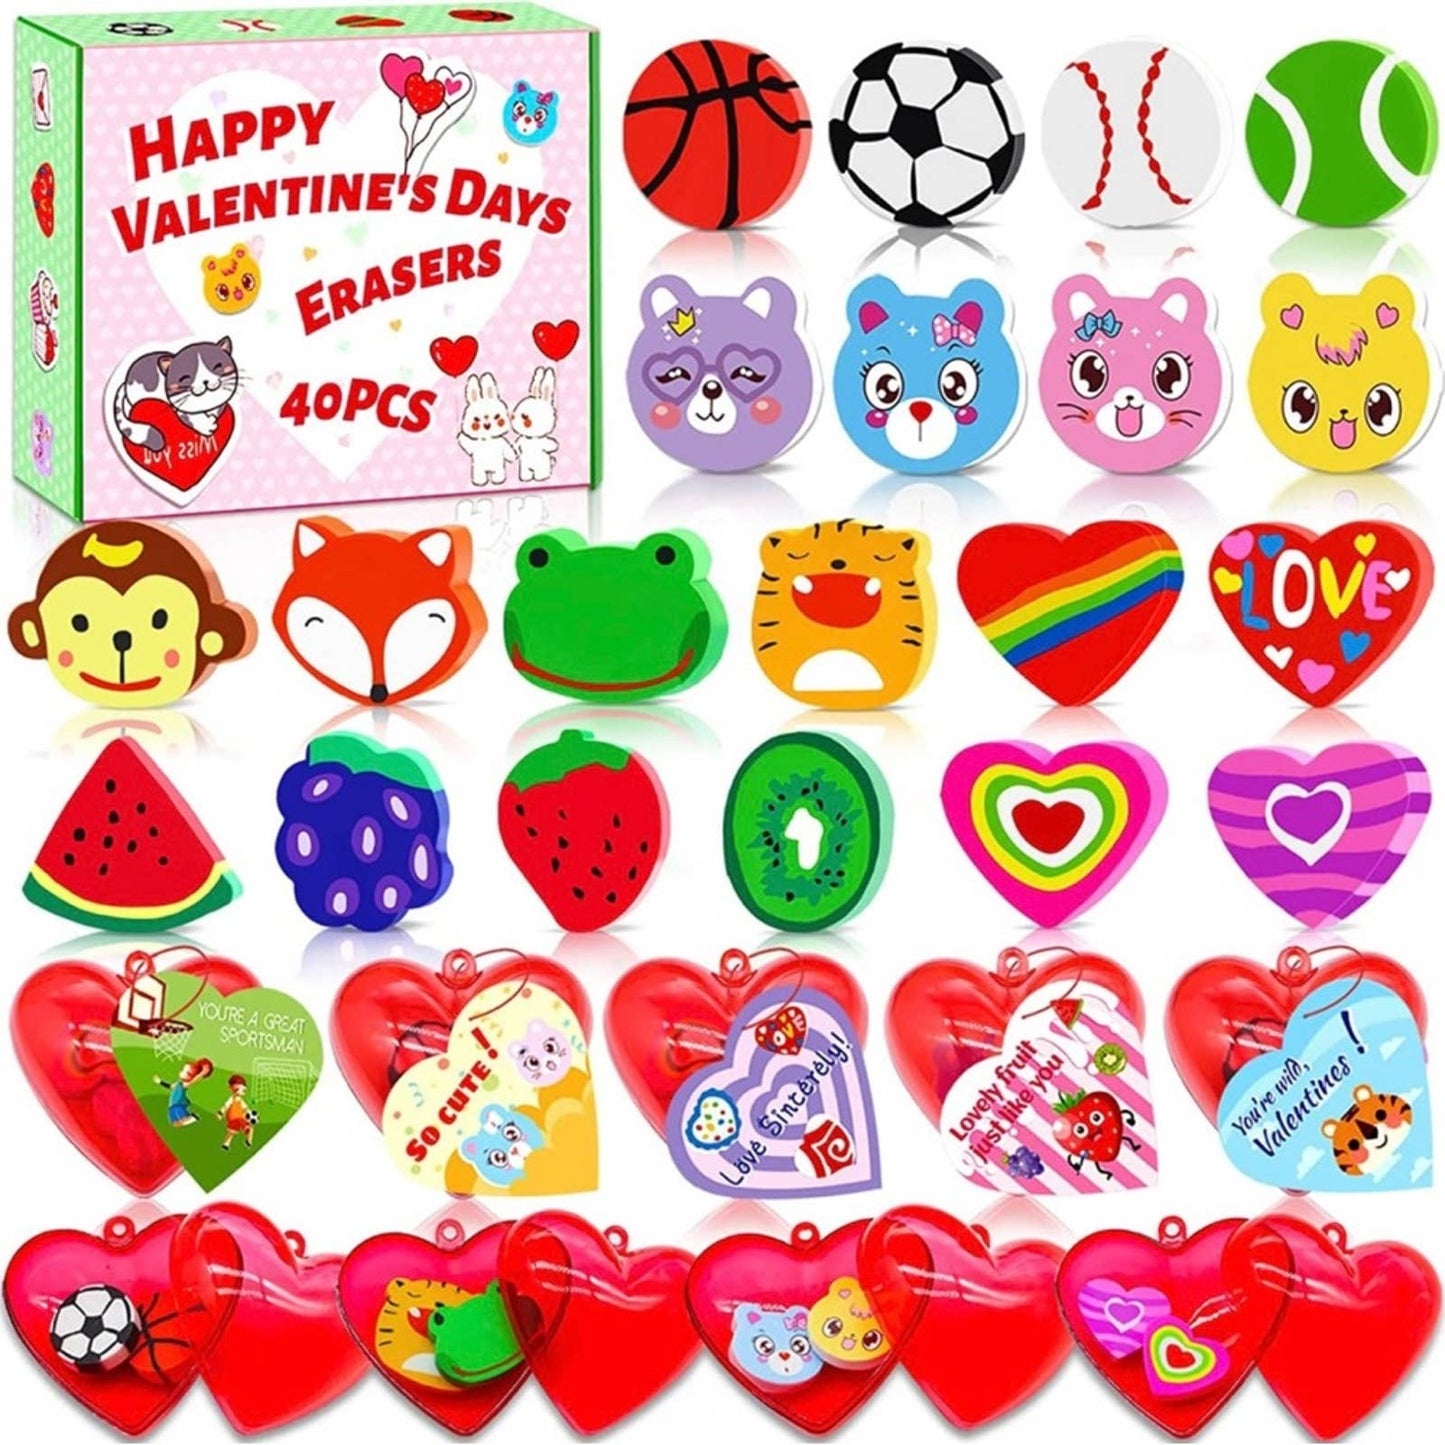 Valentines Day Gifts for Kids-40 Valentine Cards for Kids 80 Mini Erasers